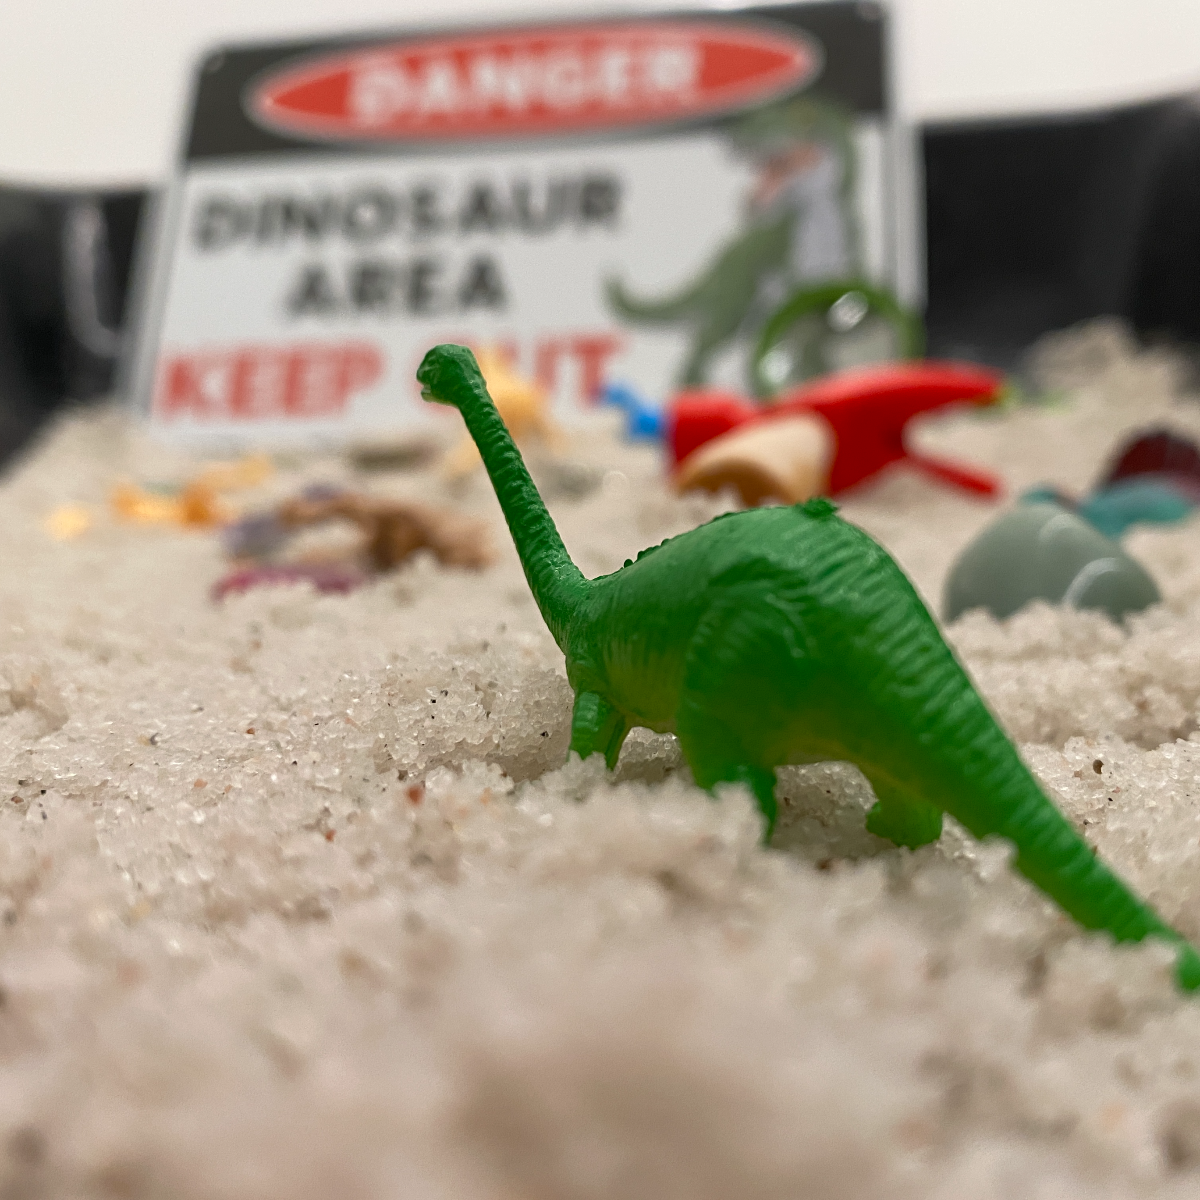 The Great Dino Dig